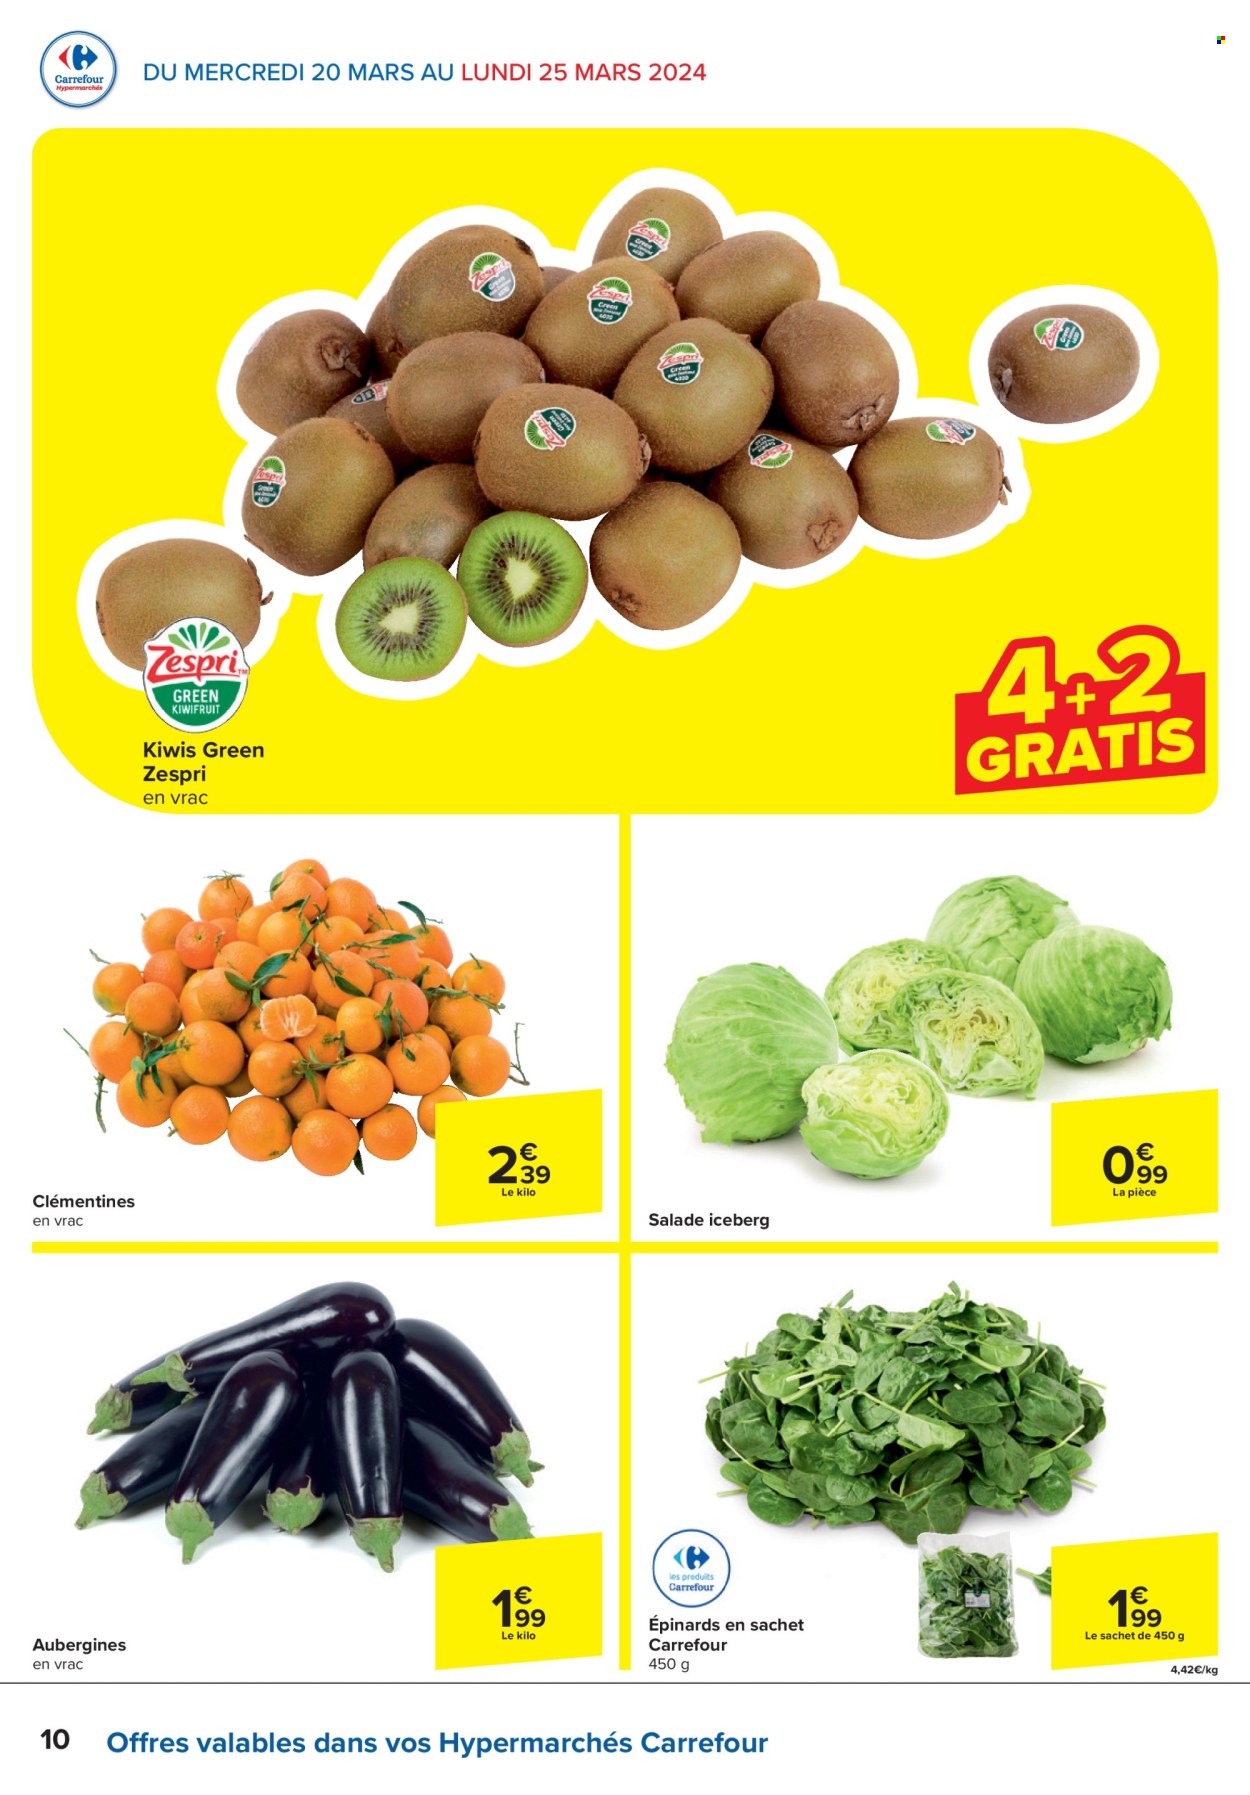 Catalogue Carrefour hypermarkt - 20.3.2024 - 2.4.2024. Page 10.